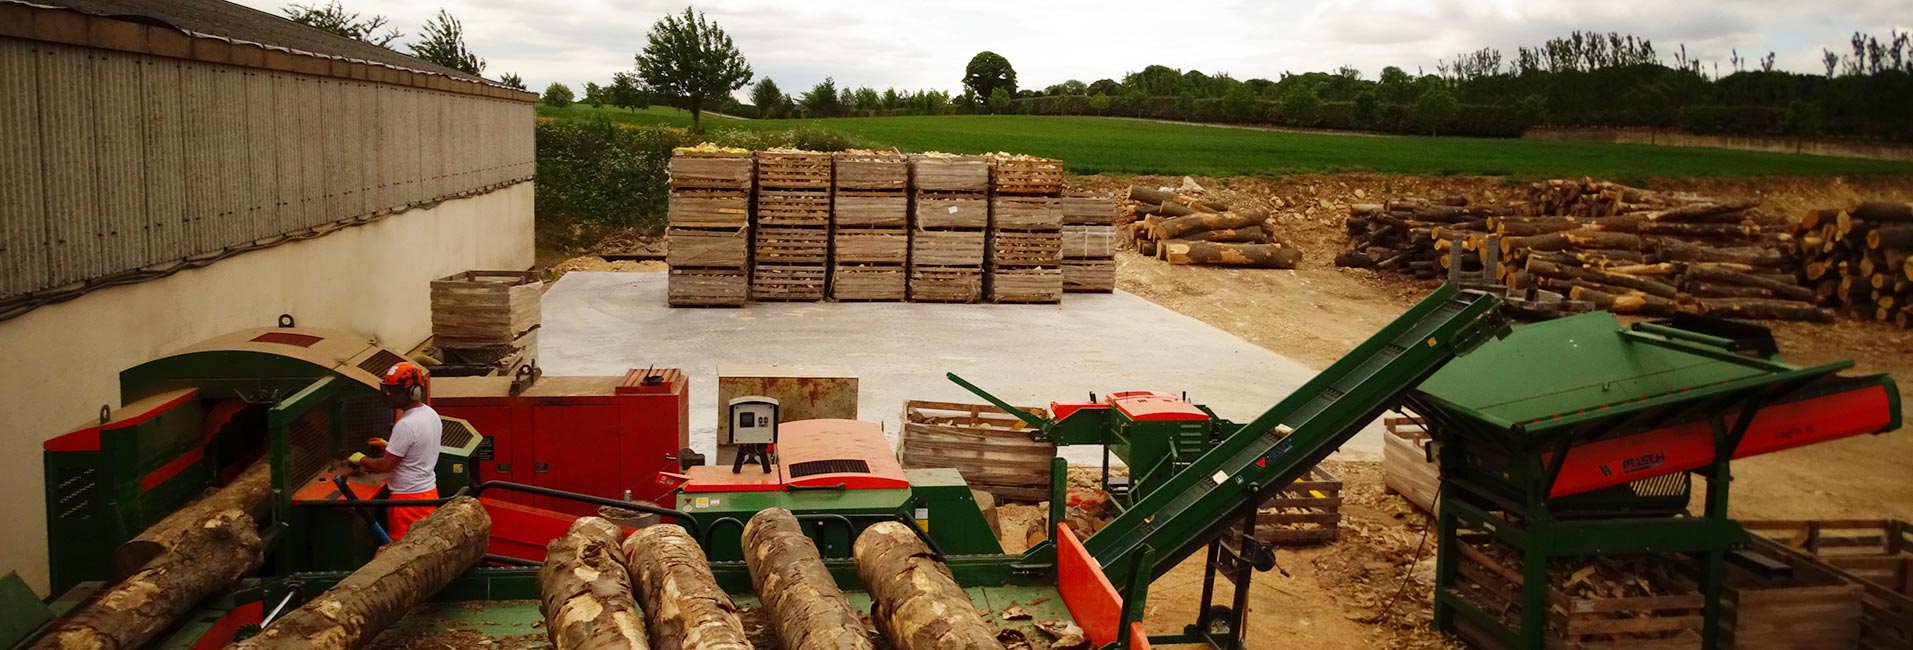 Commercial Firewood Processing